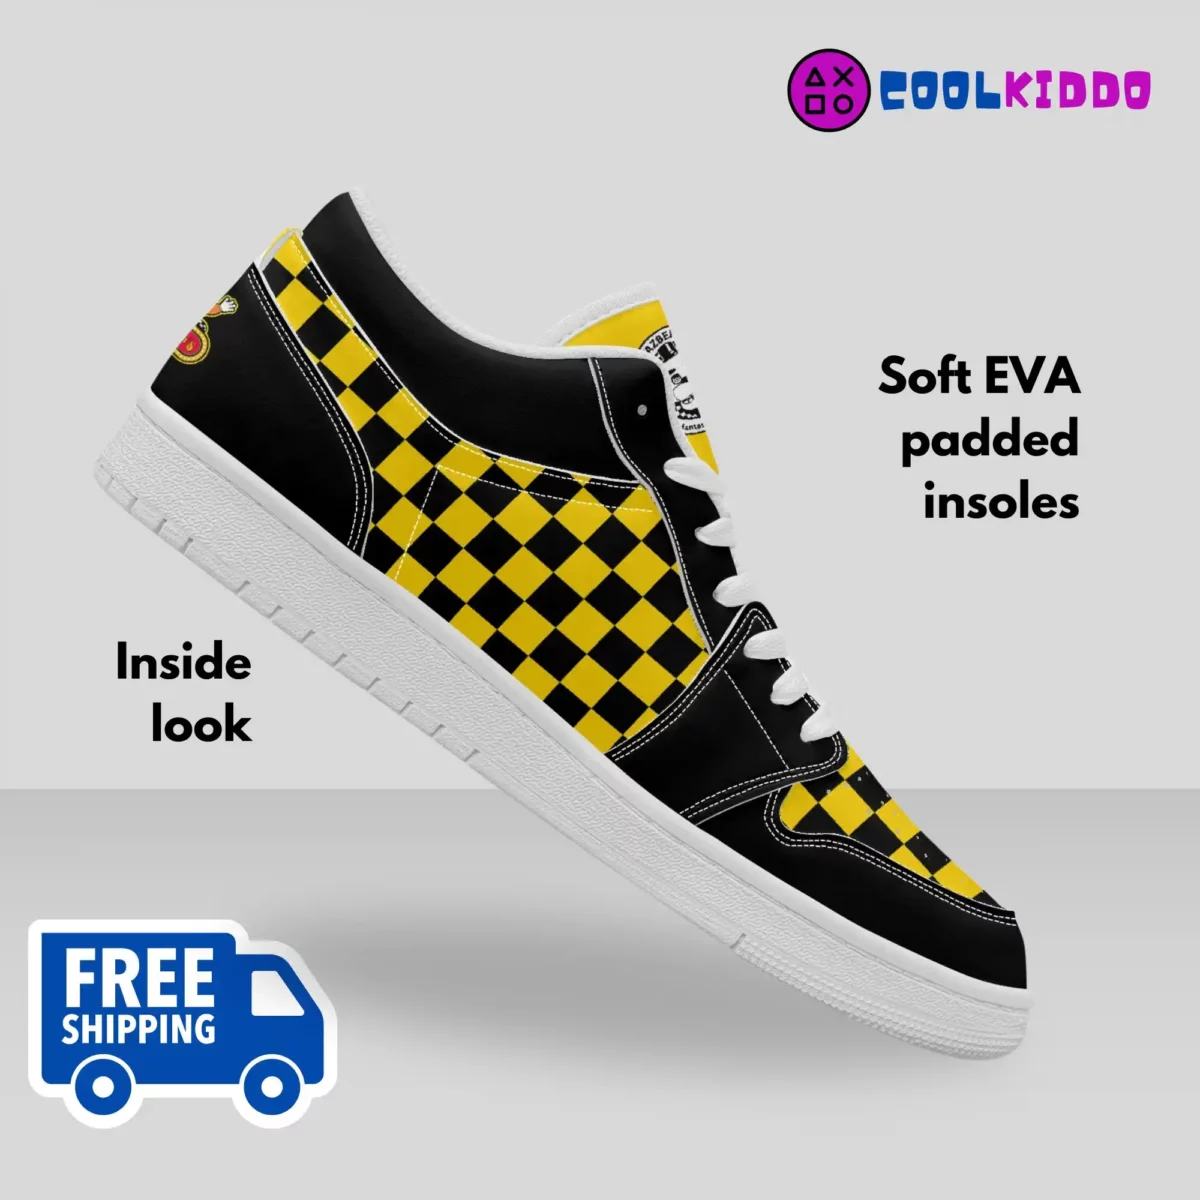 FNAF Five Nights at Freddy’s Video Game Shoes Inspired Low-Top Leather Sneakers for youth / adults Cool Kiddo 18